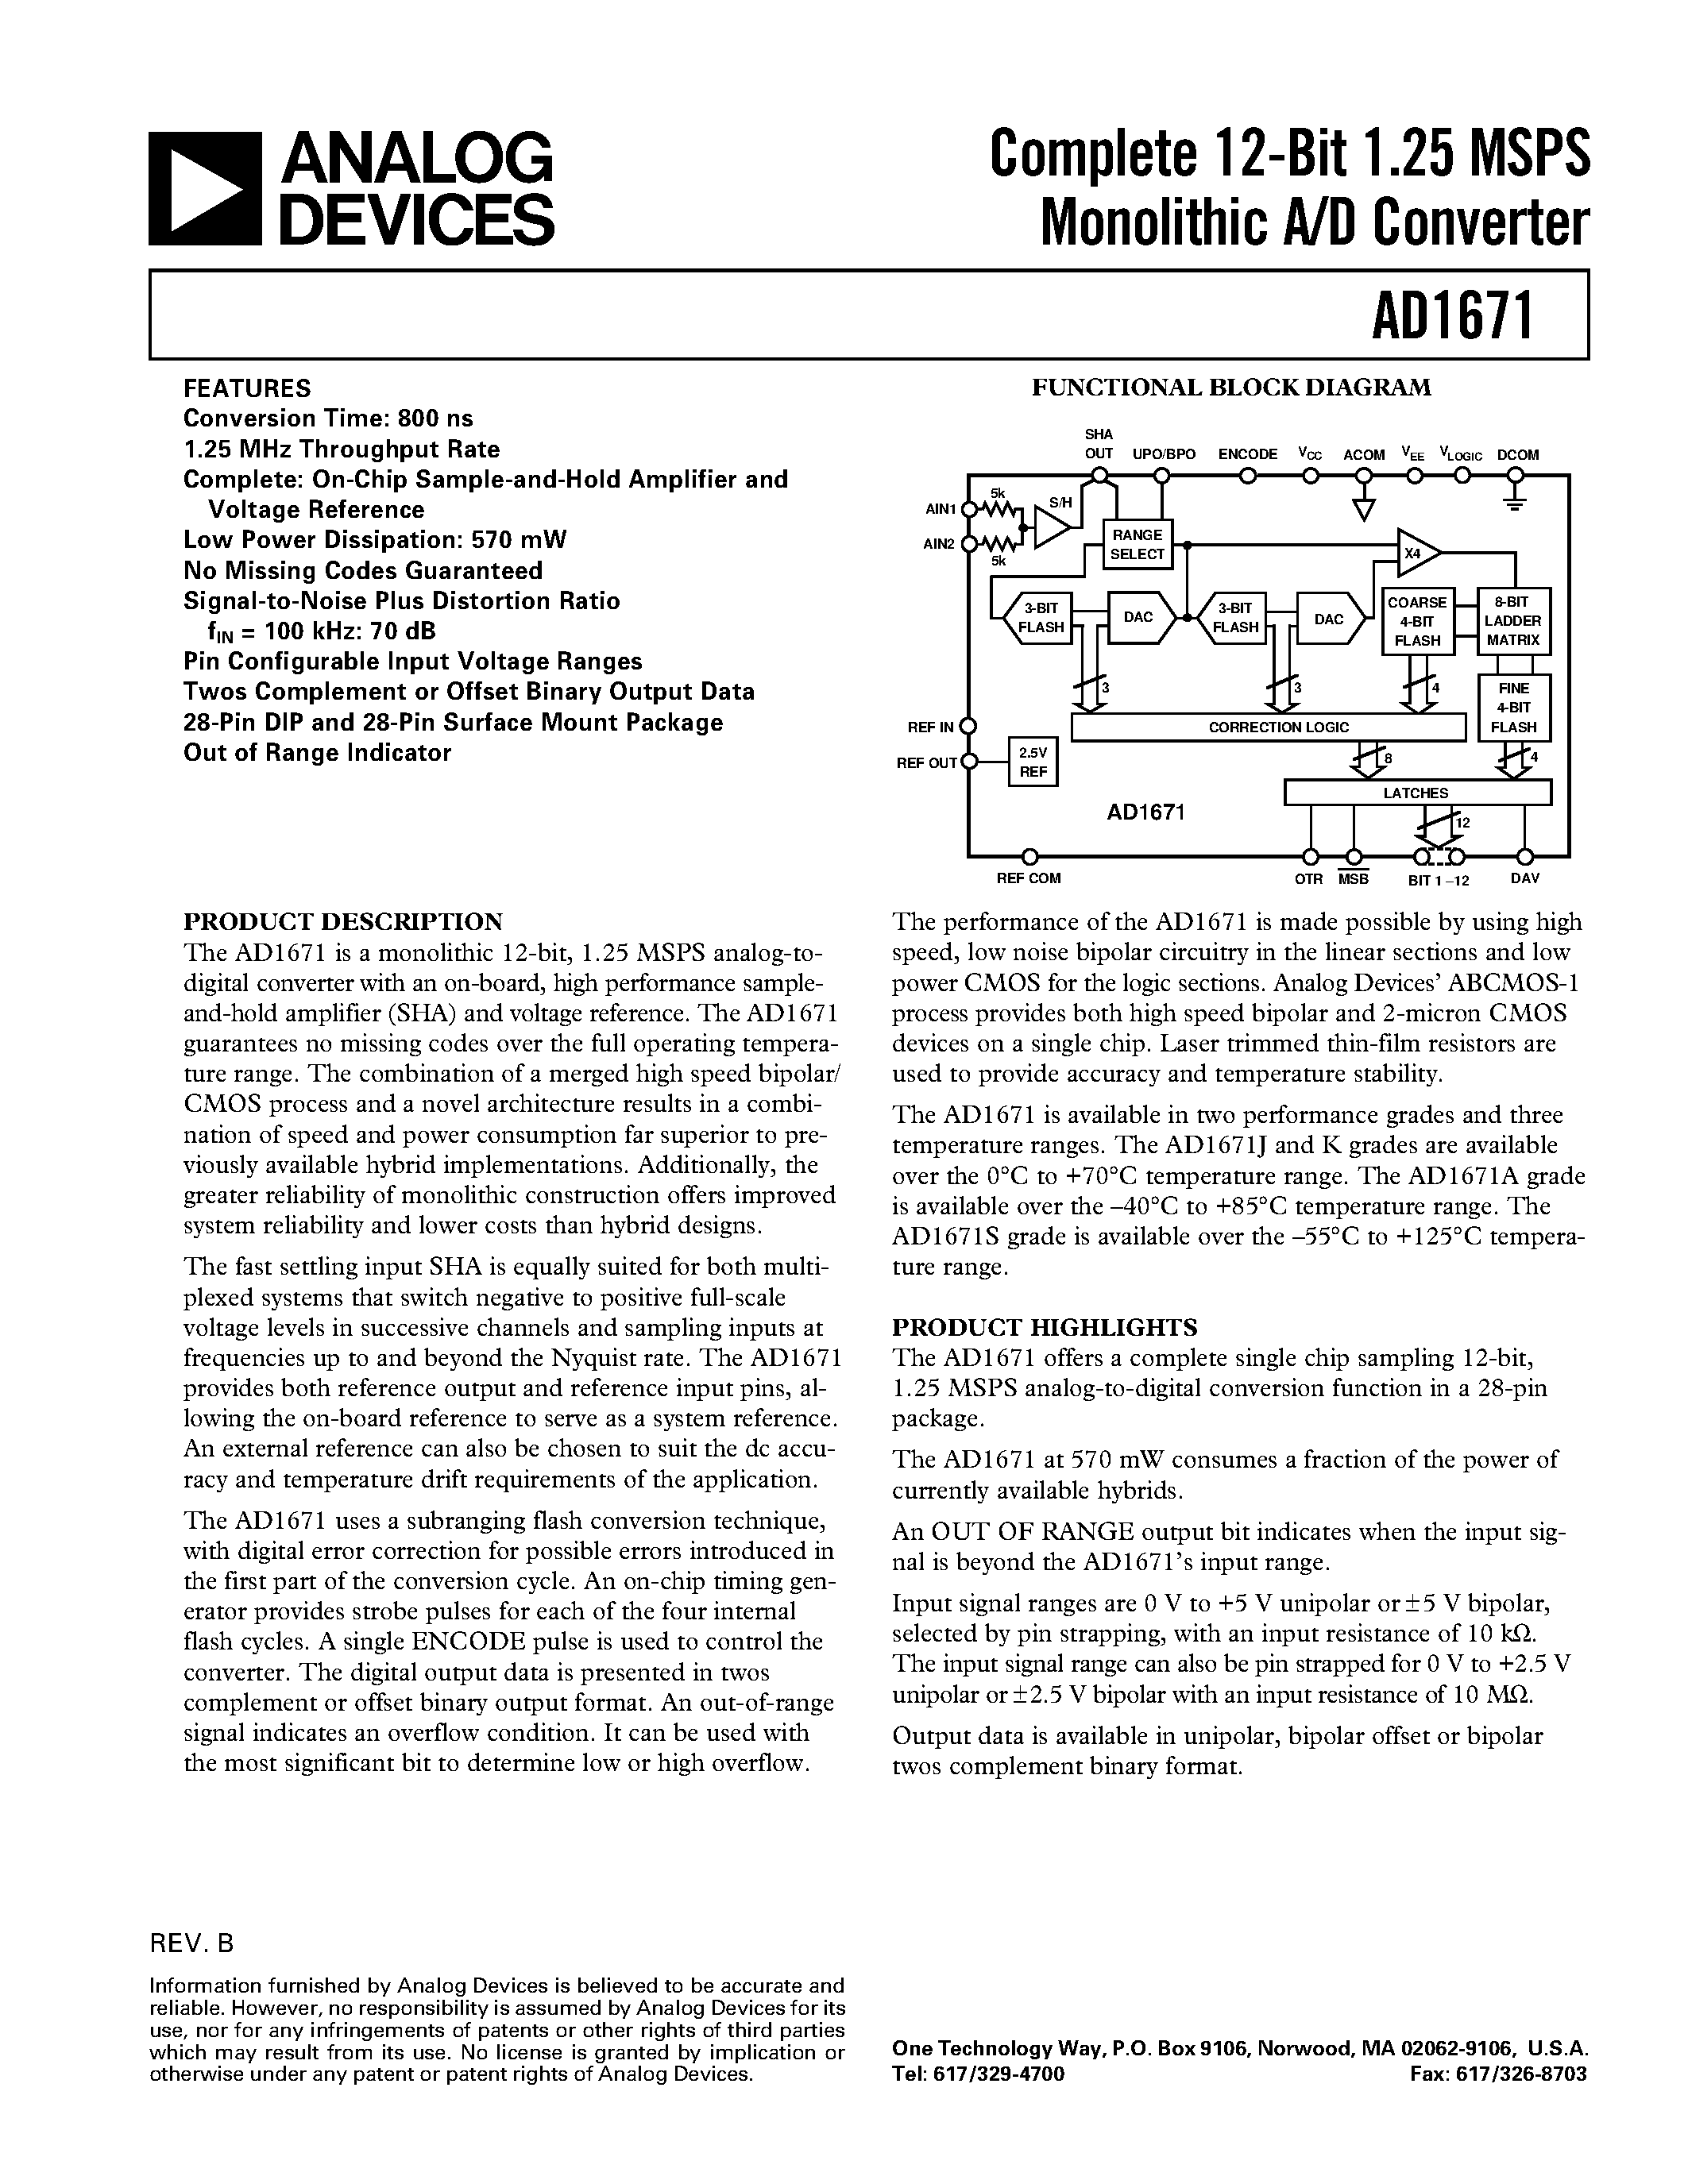 Datasheet AD1671AQ - Complete 12-Bit 1.25 MSPS Monolithic A/D Converter page 1